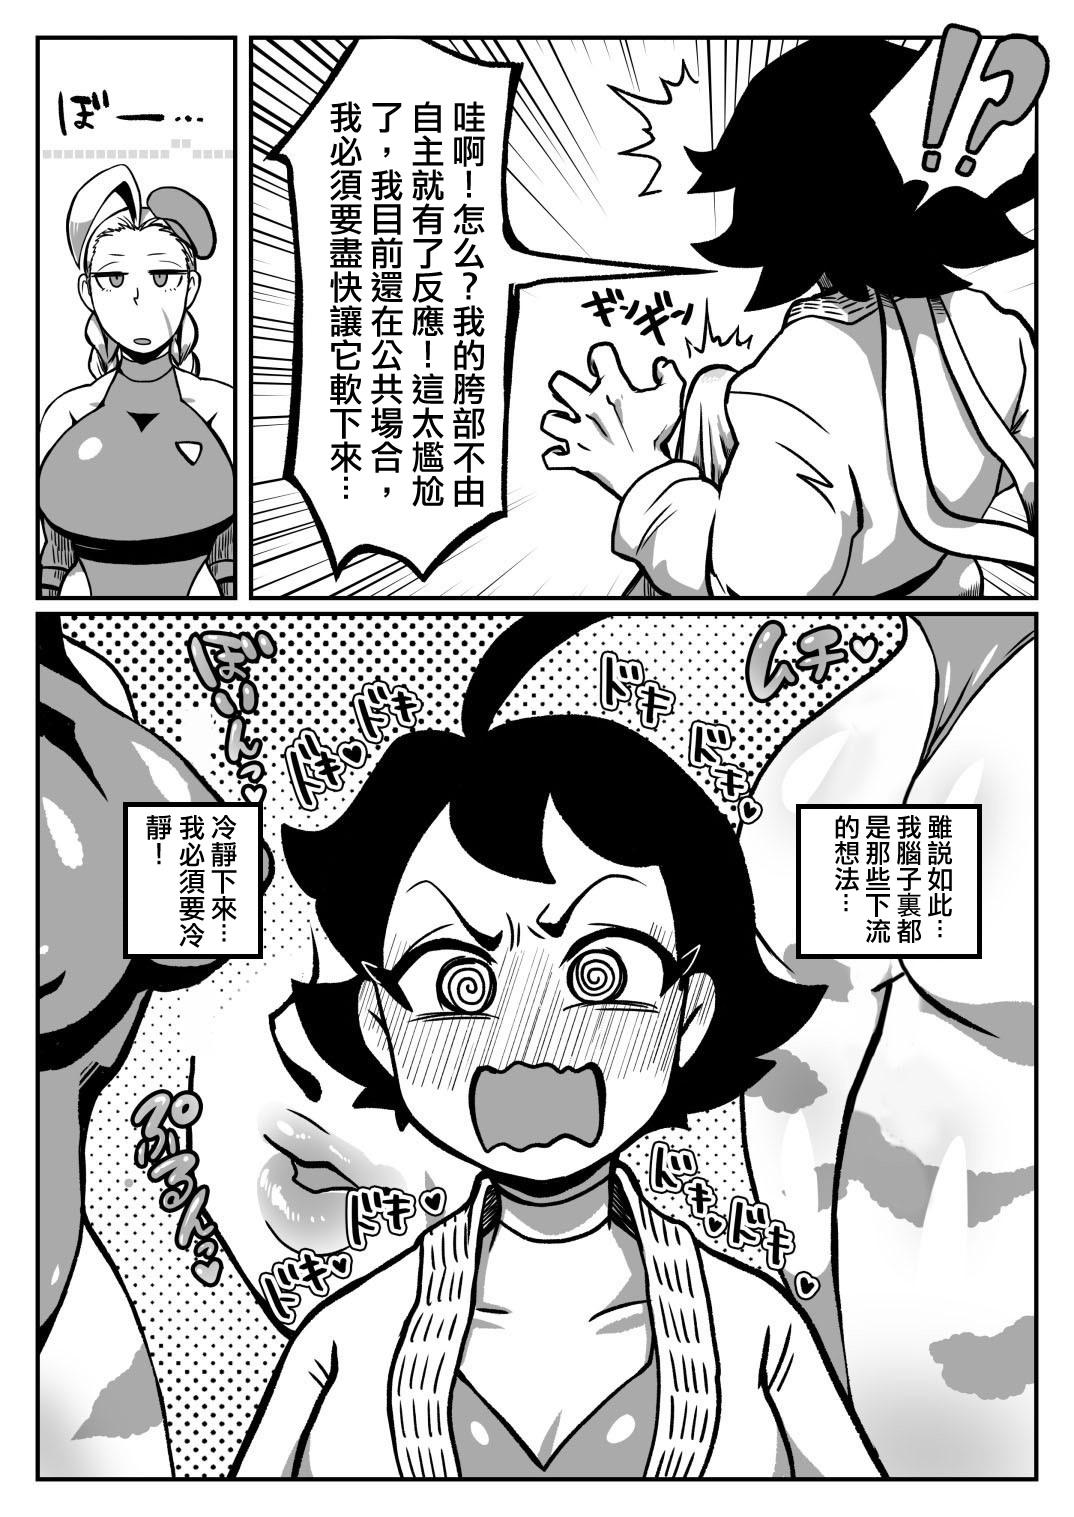 Hot Milf Mako ♂ Mmy - Street fighter Solo Girl - Page 8